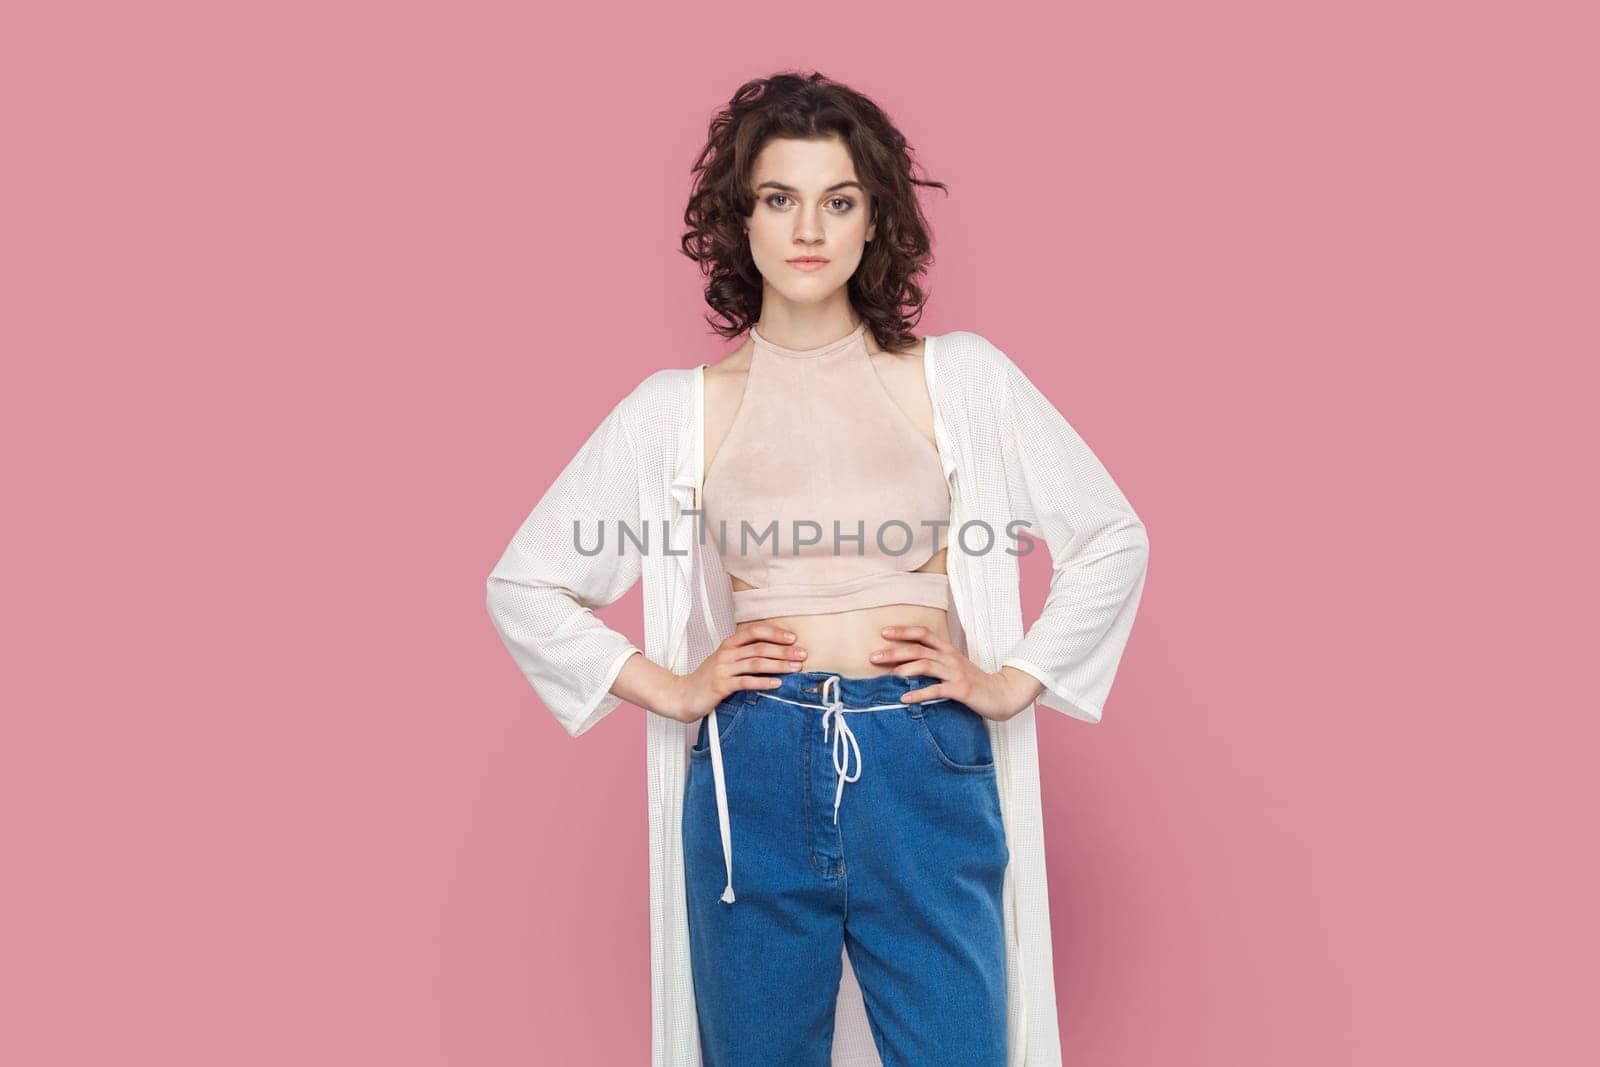 Portrait of self-confident egoistic woman with curly hair wearing casual style outfit standing with hands on hips, looking at camera, feels pride. Indoor studio shot isolated on pink background.